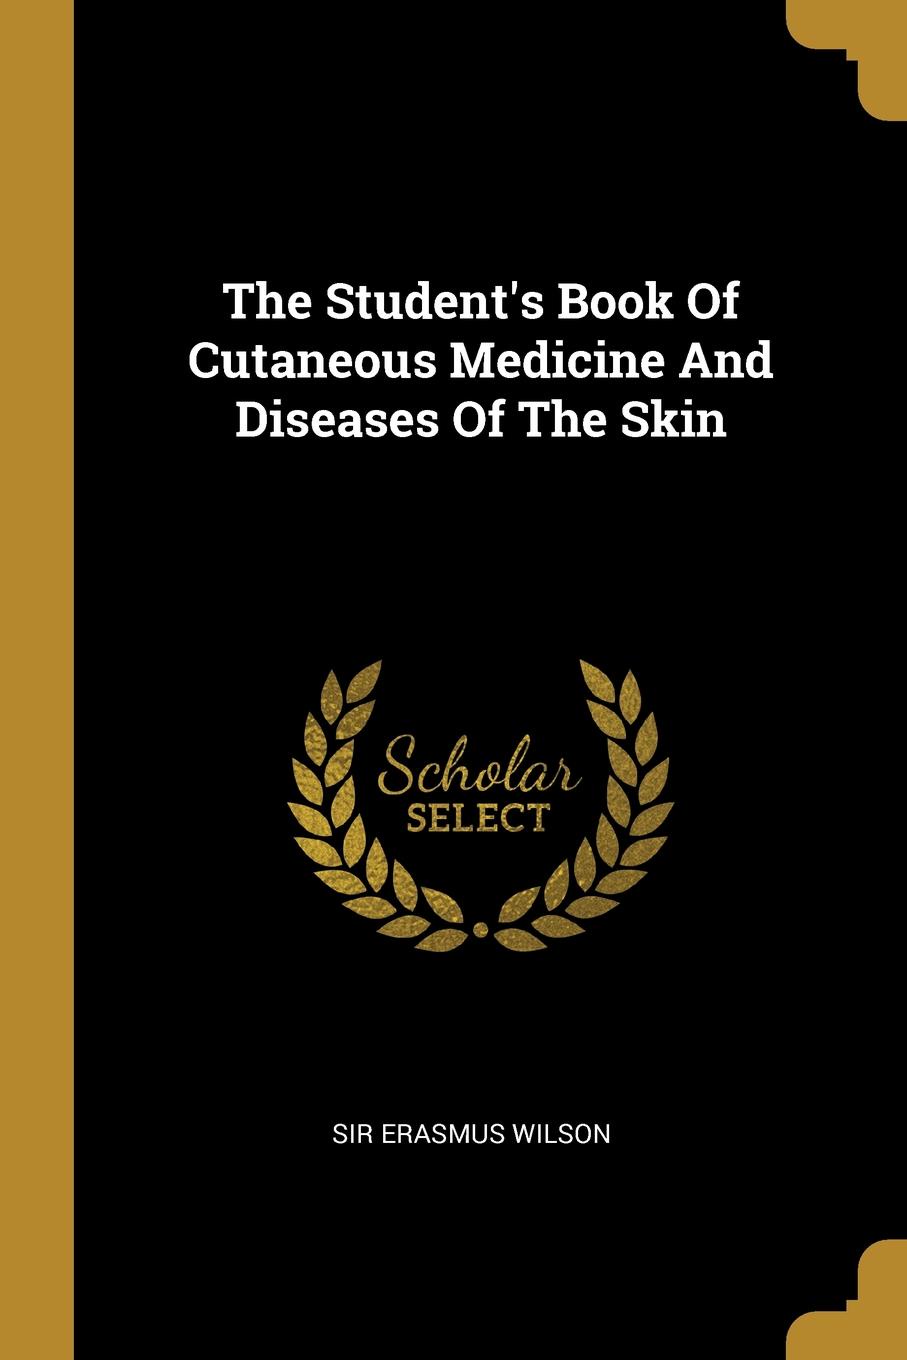 The Student.s Book Of Cutaneous Medicine And Diseases Of The Skin